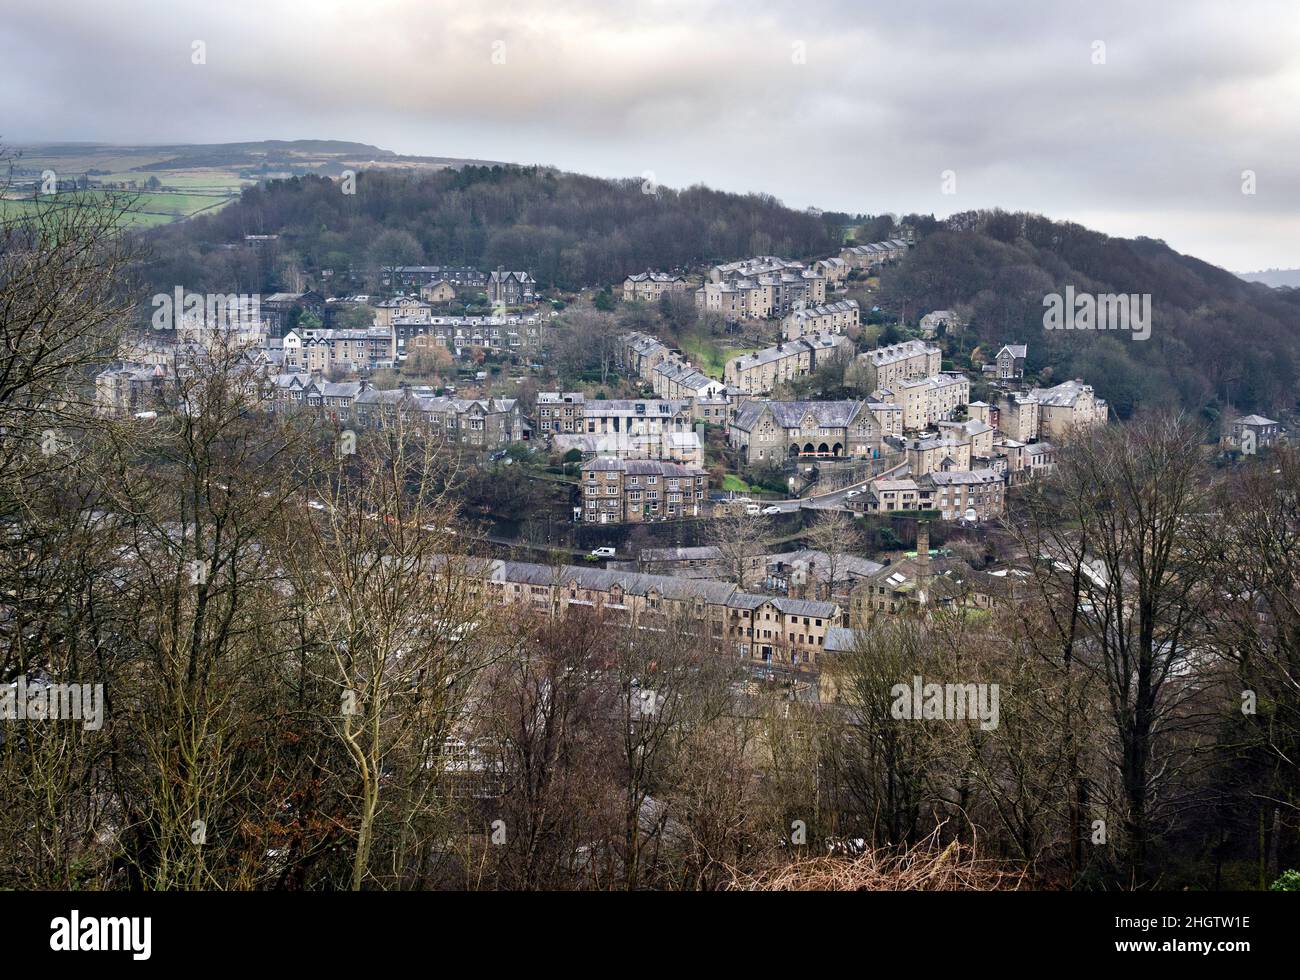 A view of the Calderdale town of Hebden Bridge, West Yorkshire. This view was made famous by a Dennis Thorpe photograph. Stock Photo